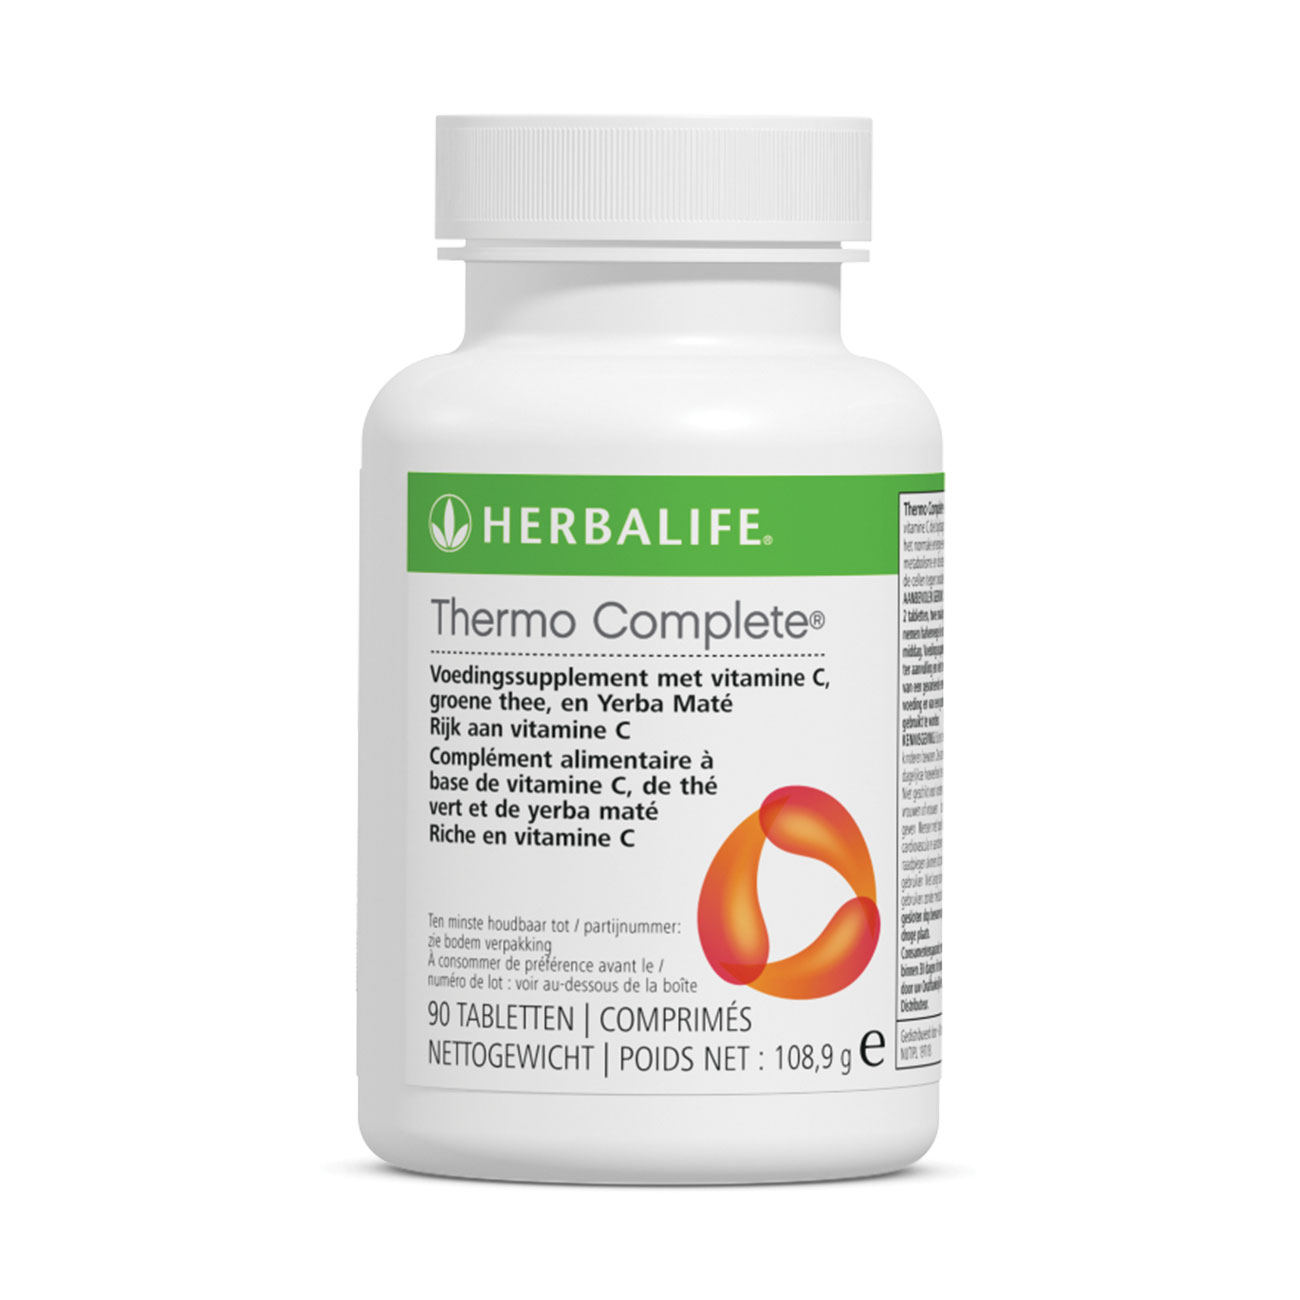 Thermo Complete® voedingssupplement product shot